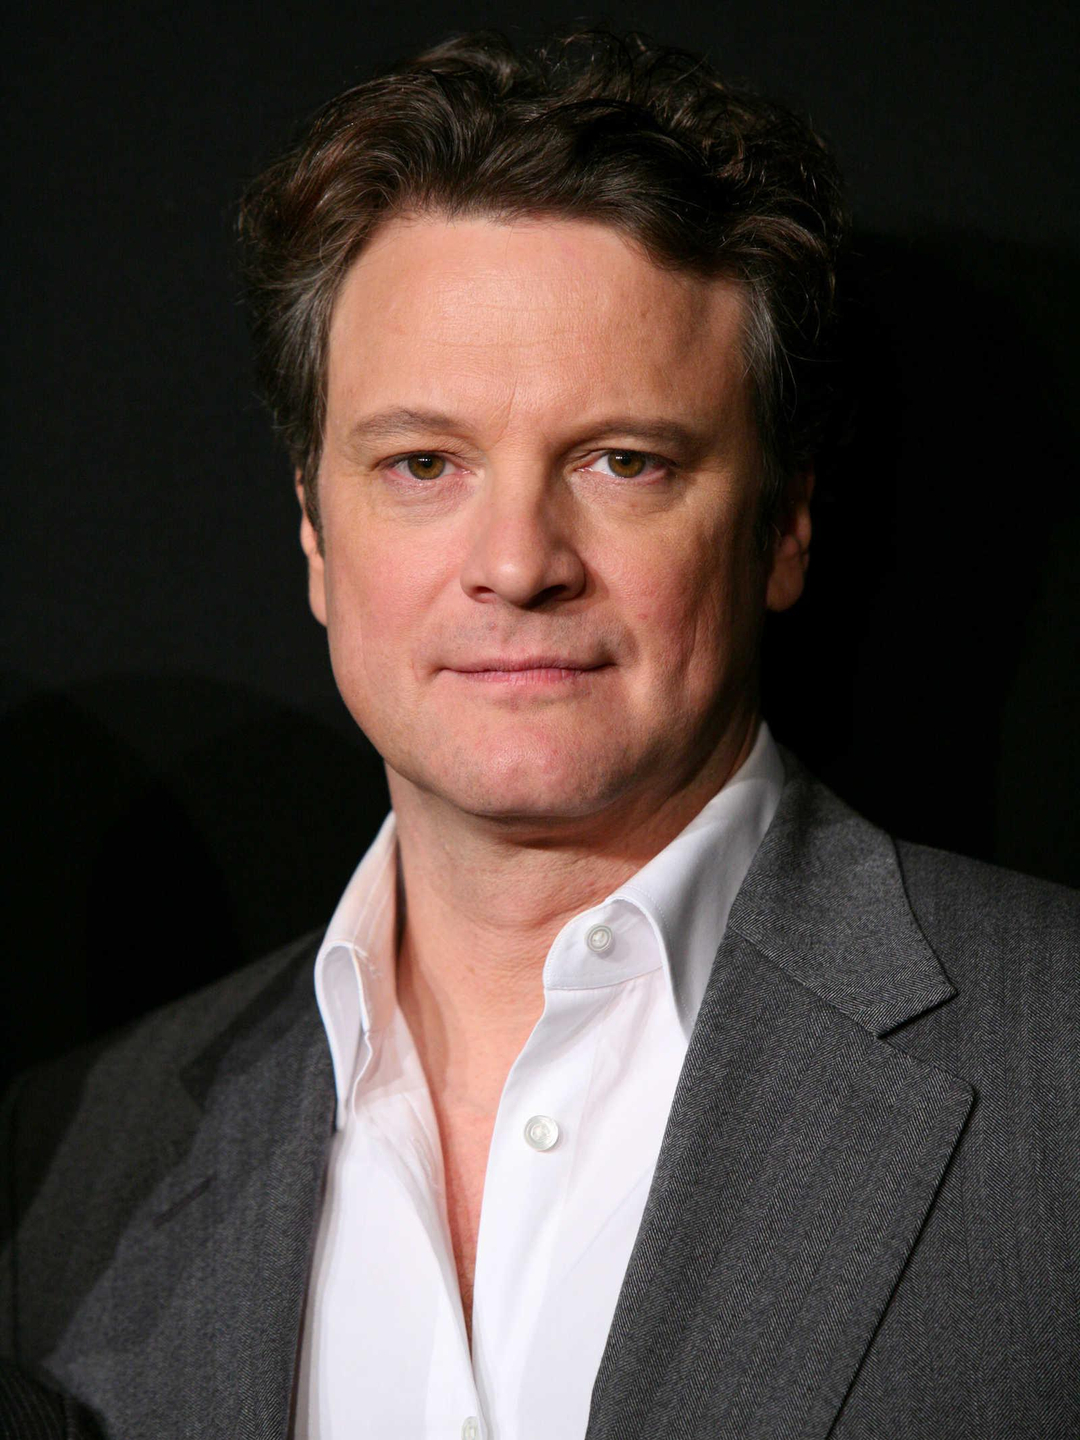 Colin Firth background